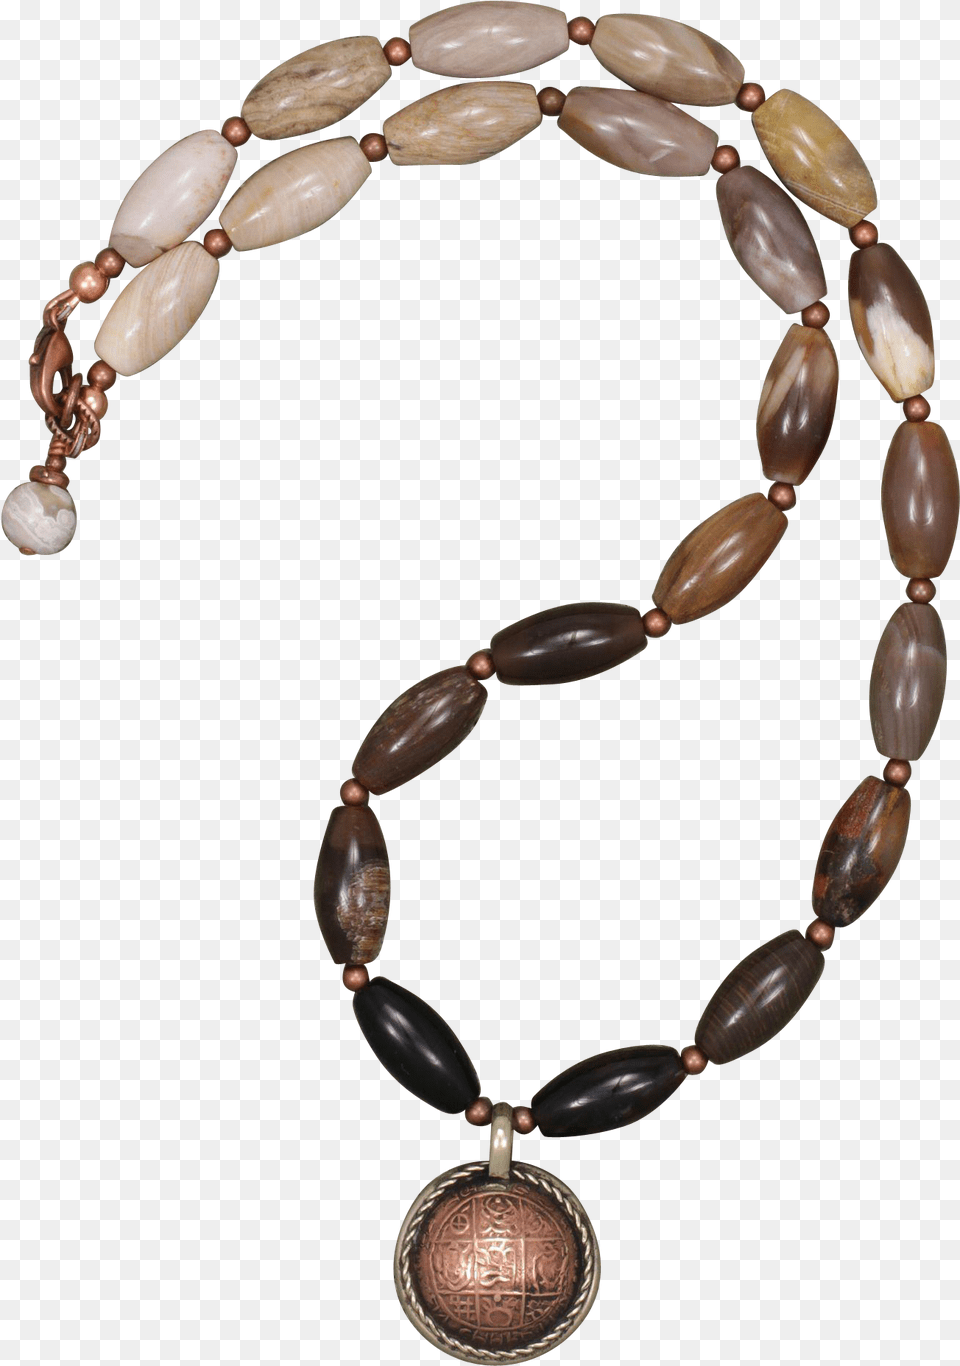 Necklace, Accessories, Jewelry, Bead, Bracelet Png Image